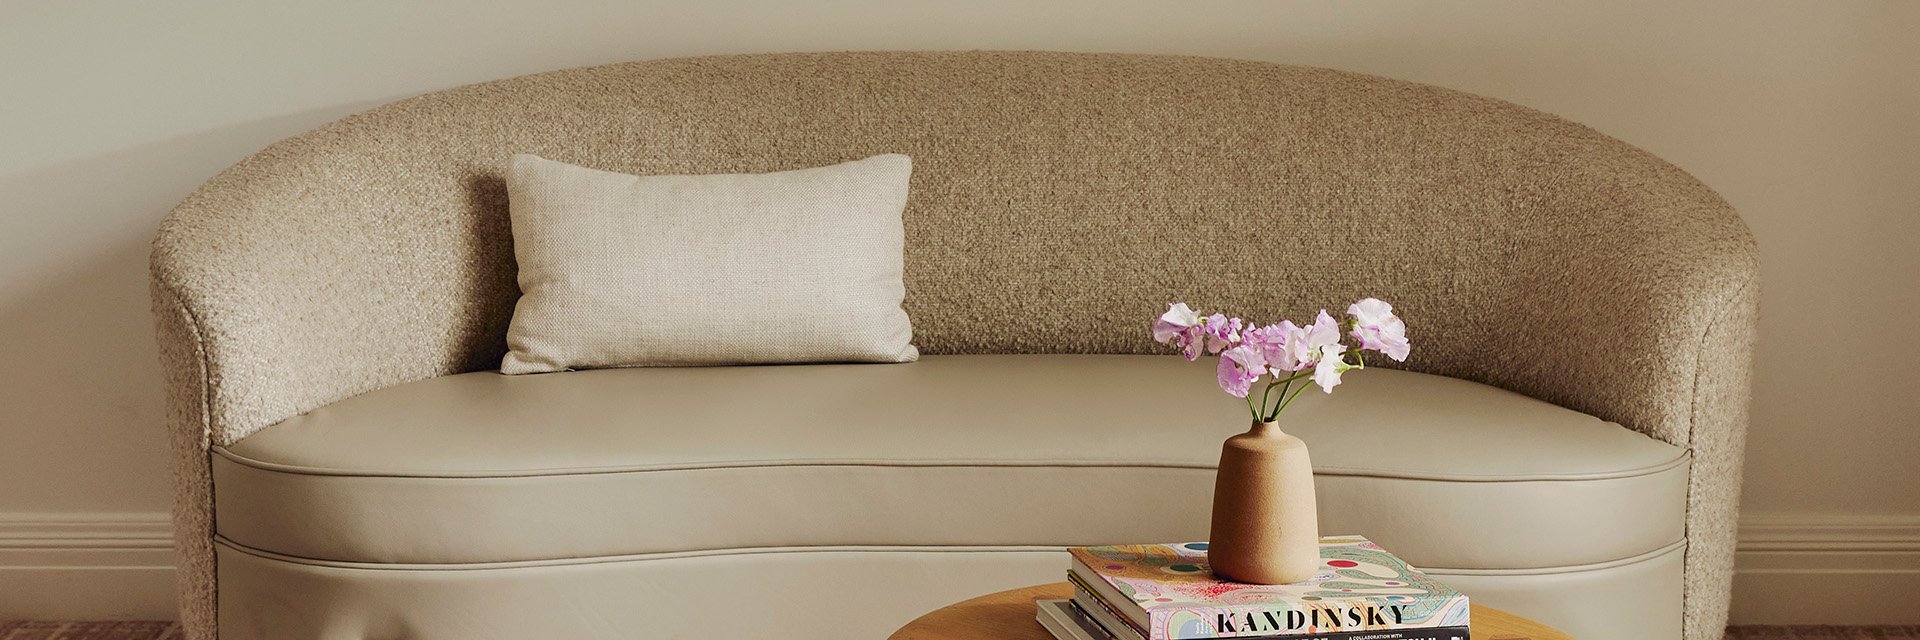 A curved ivory couch with a small, white pillow. A stem with pink flowers is in a vase on top of a stack of book on a table.